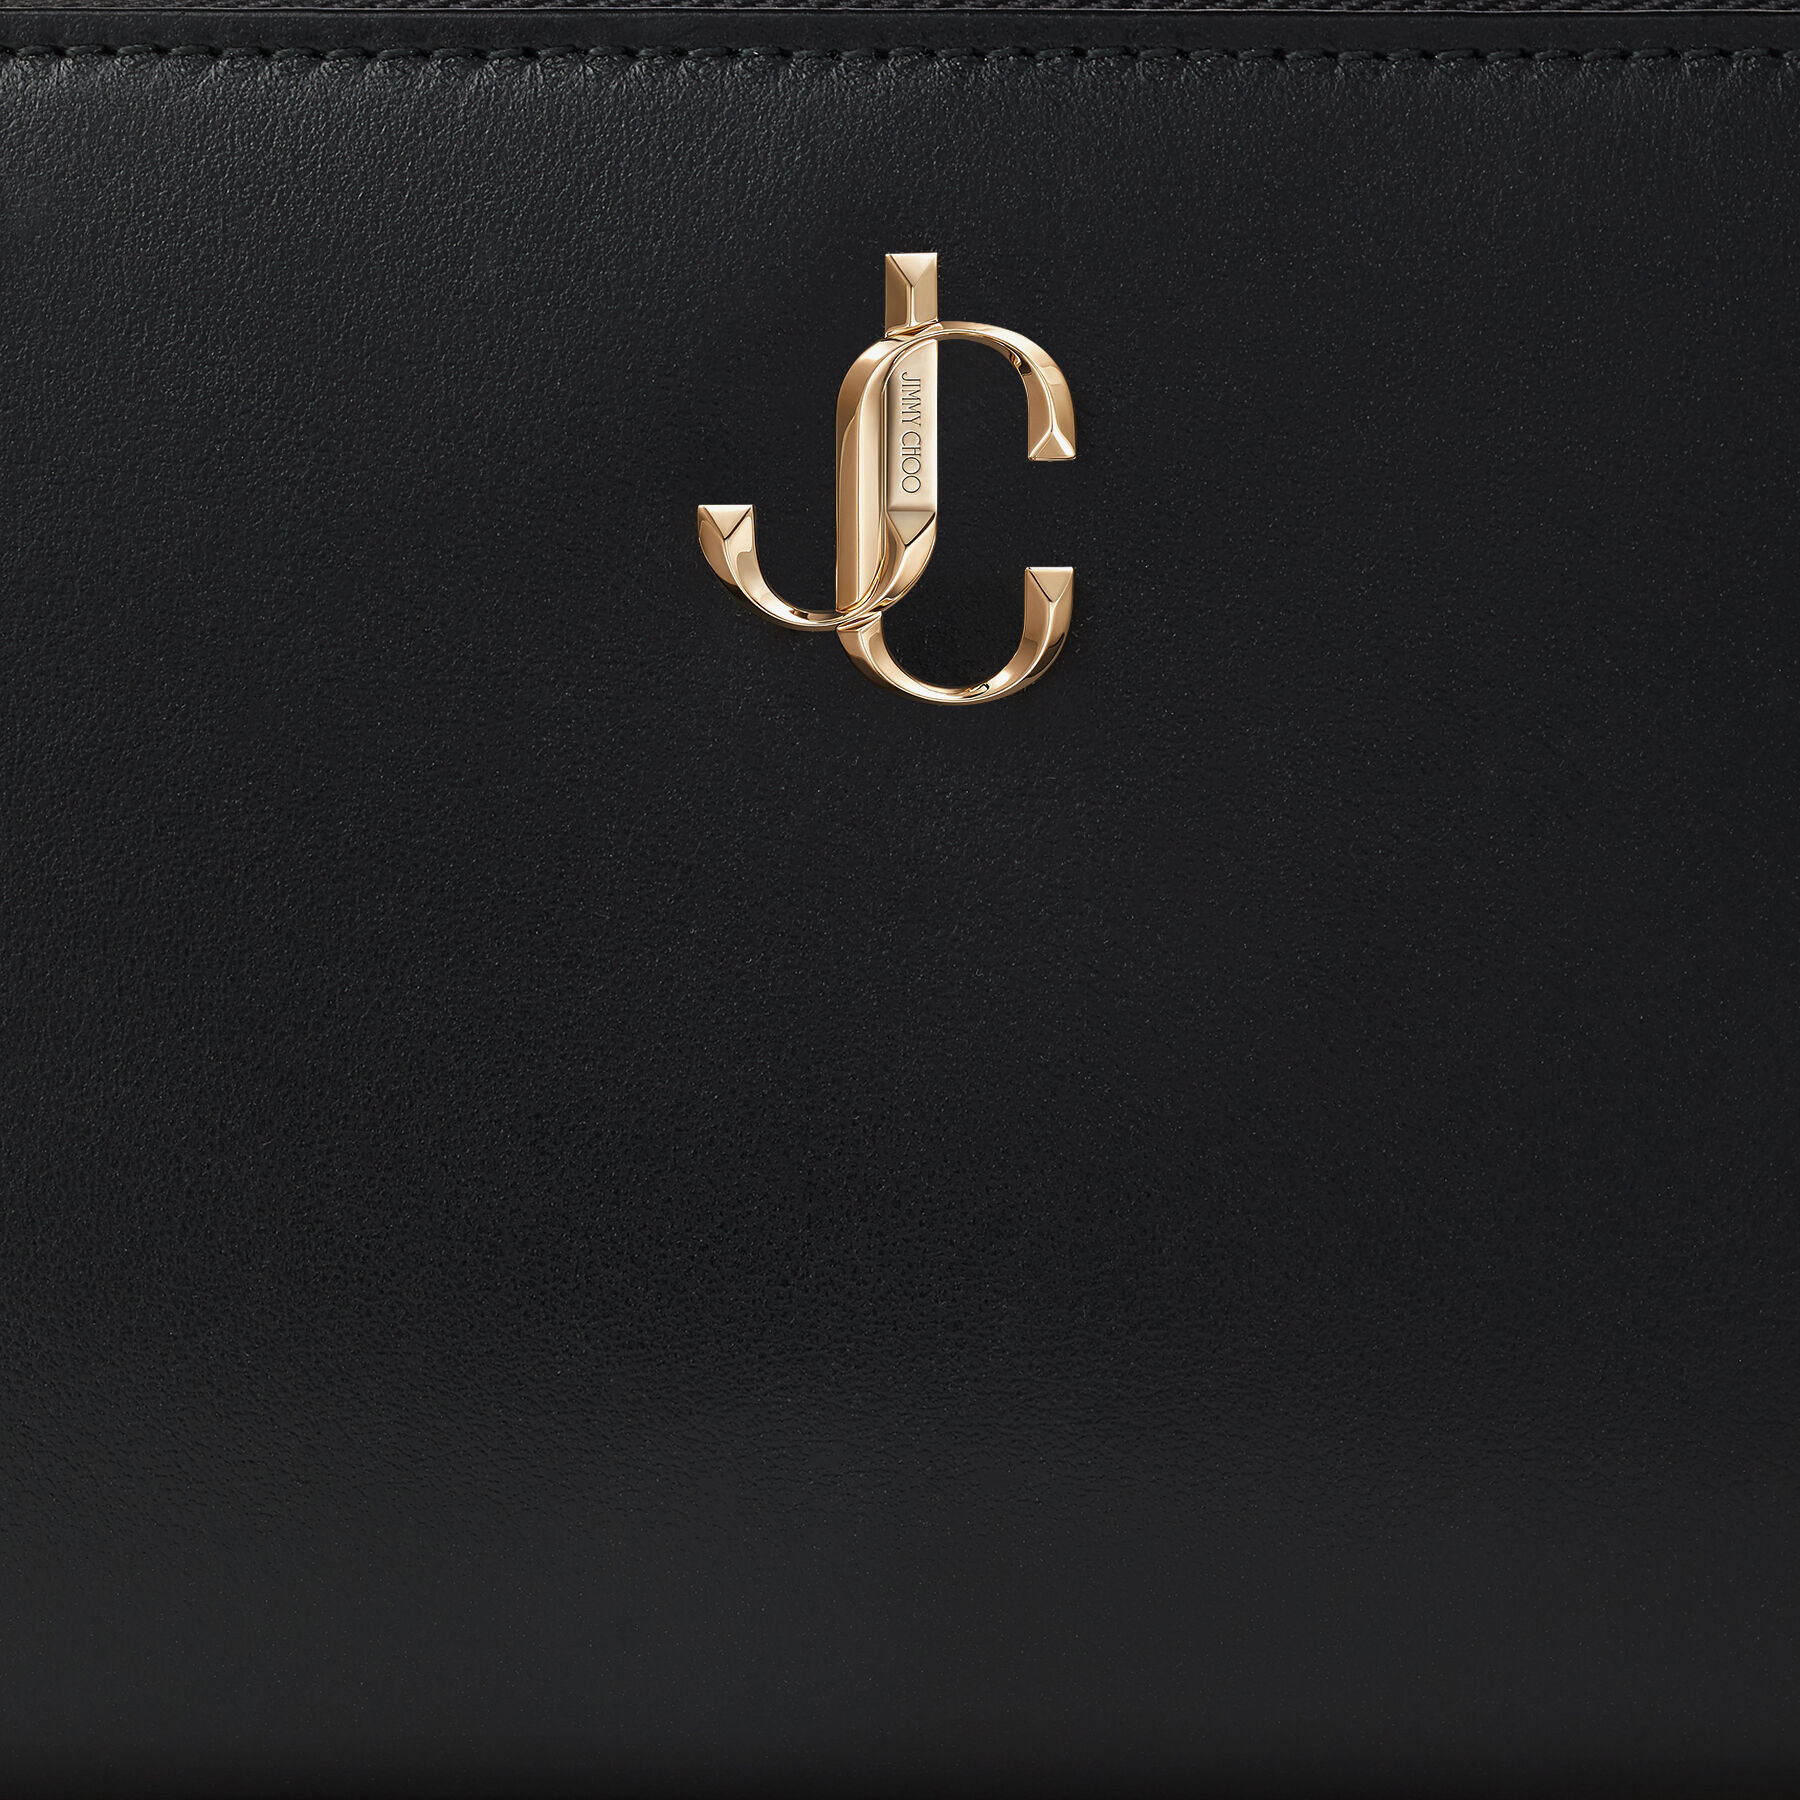 Black Smooth Calf Leather Wallet with JC Emblem |PIPPA |Cruise '20 